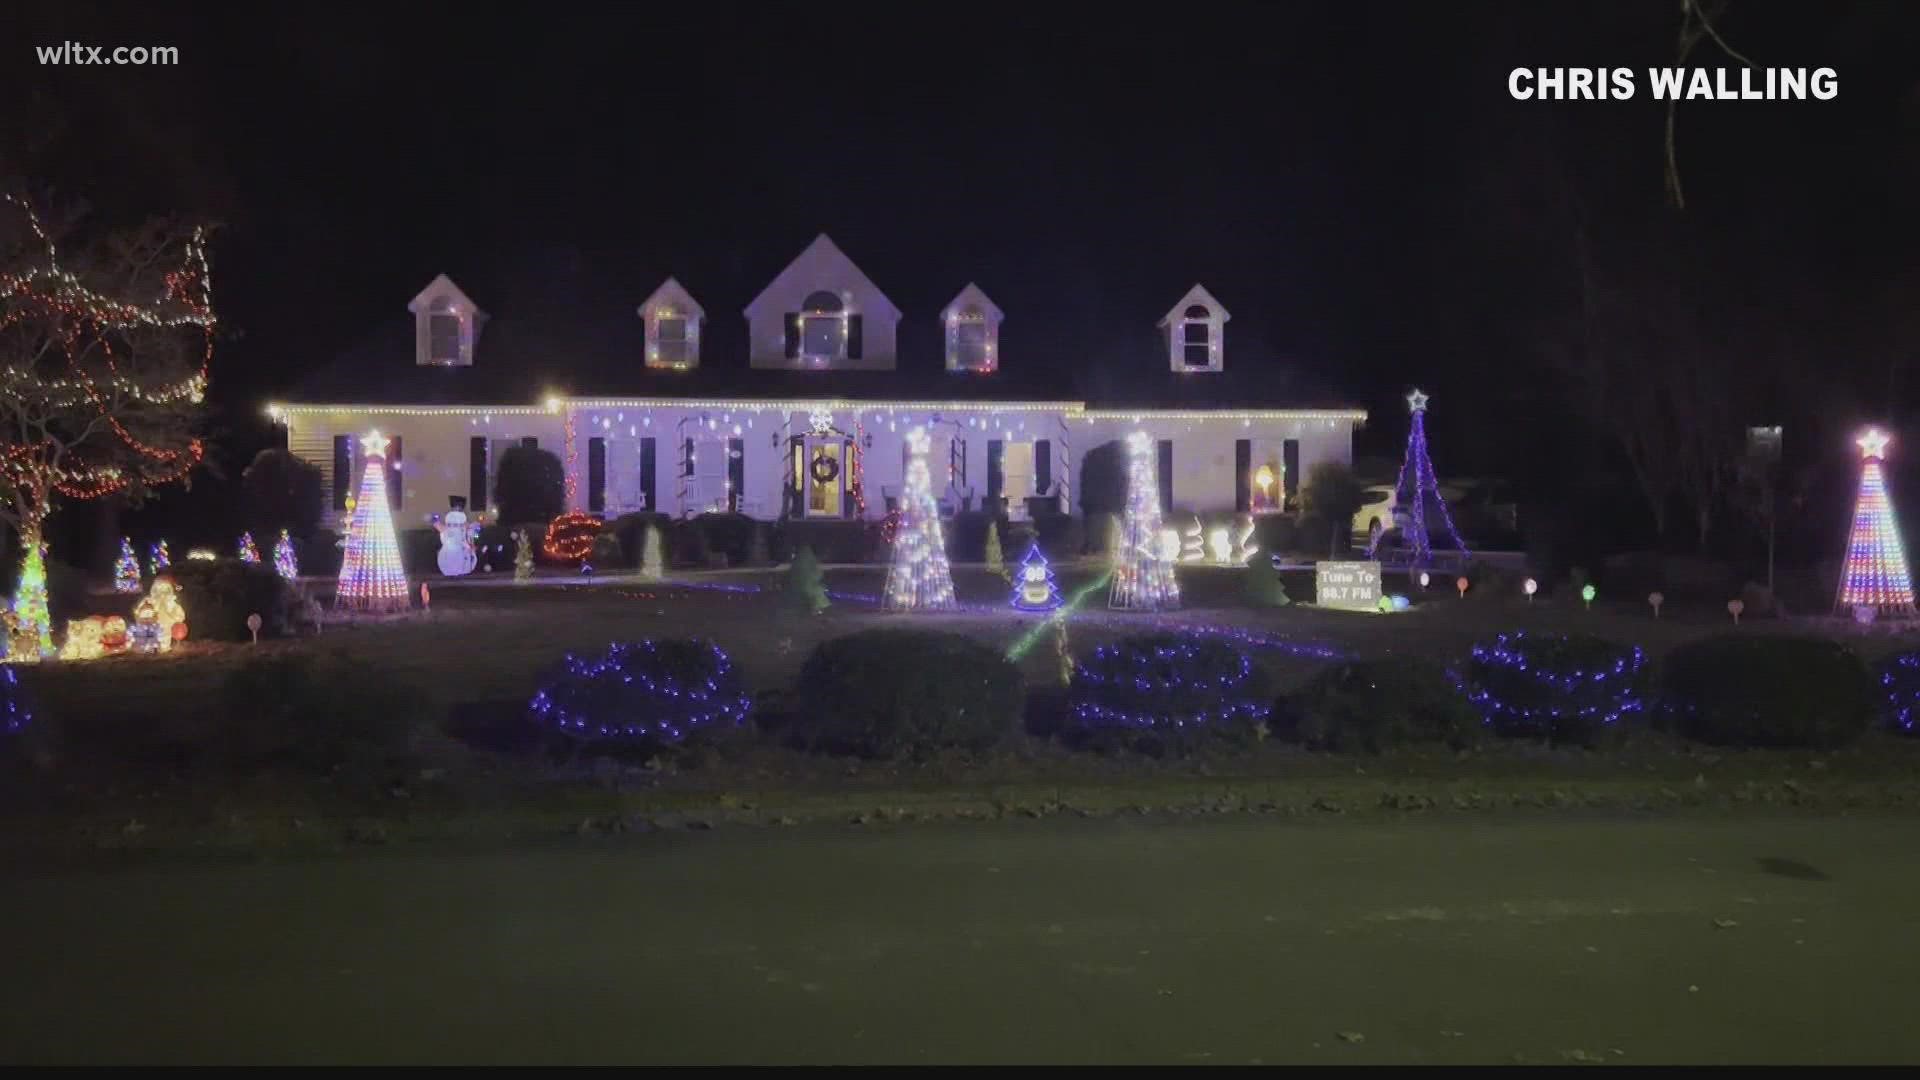 The Walling family has been decorating for the last three years and each year it gets bigger.